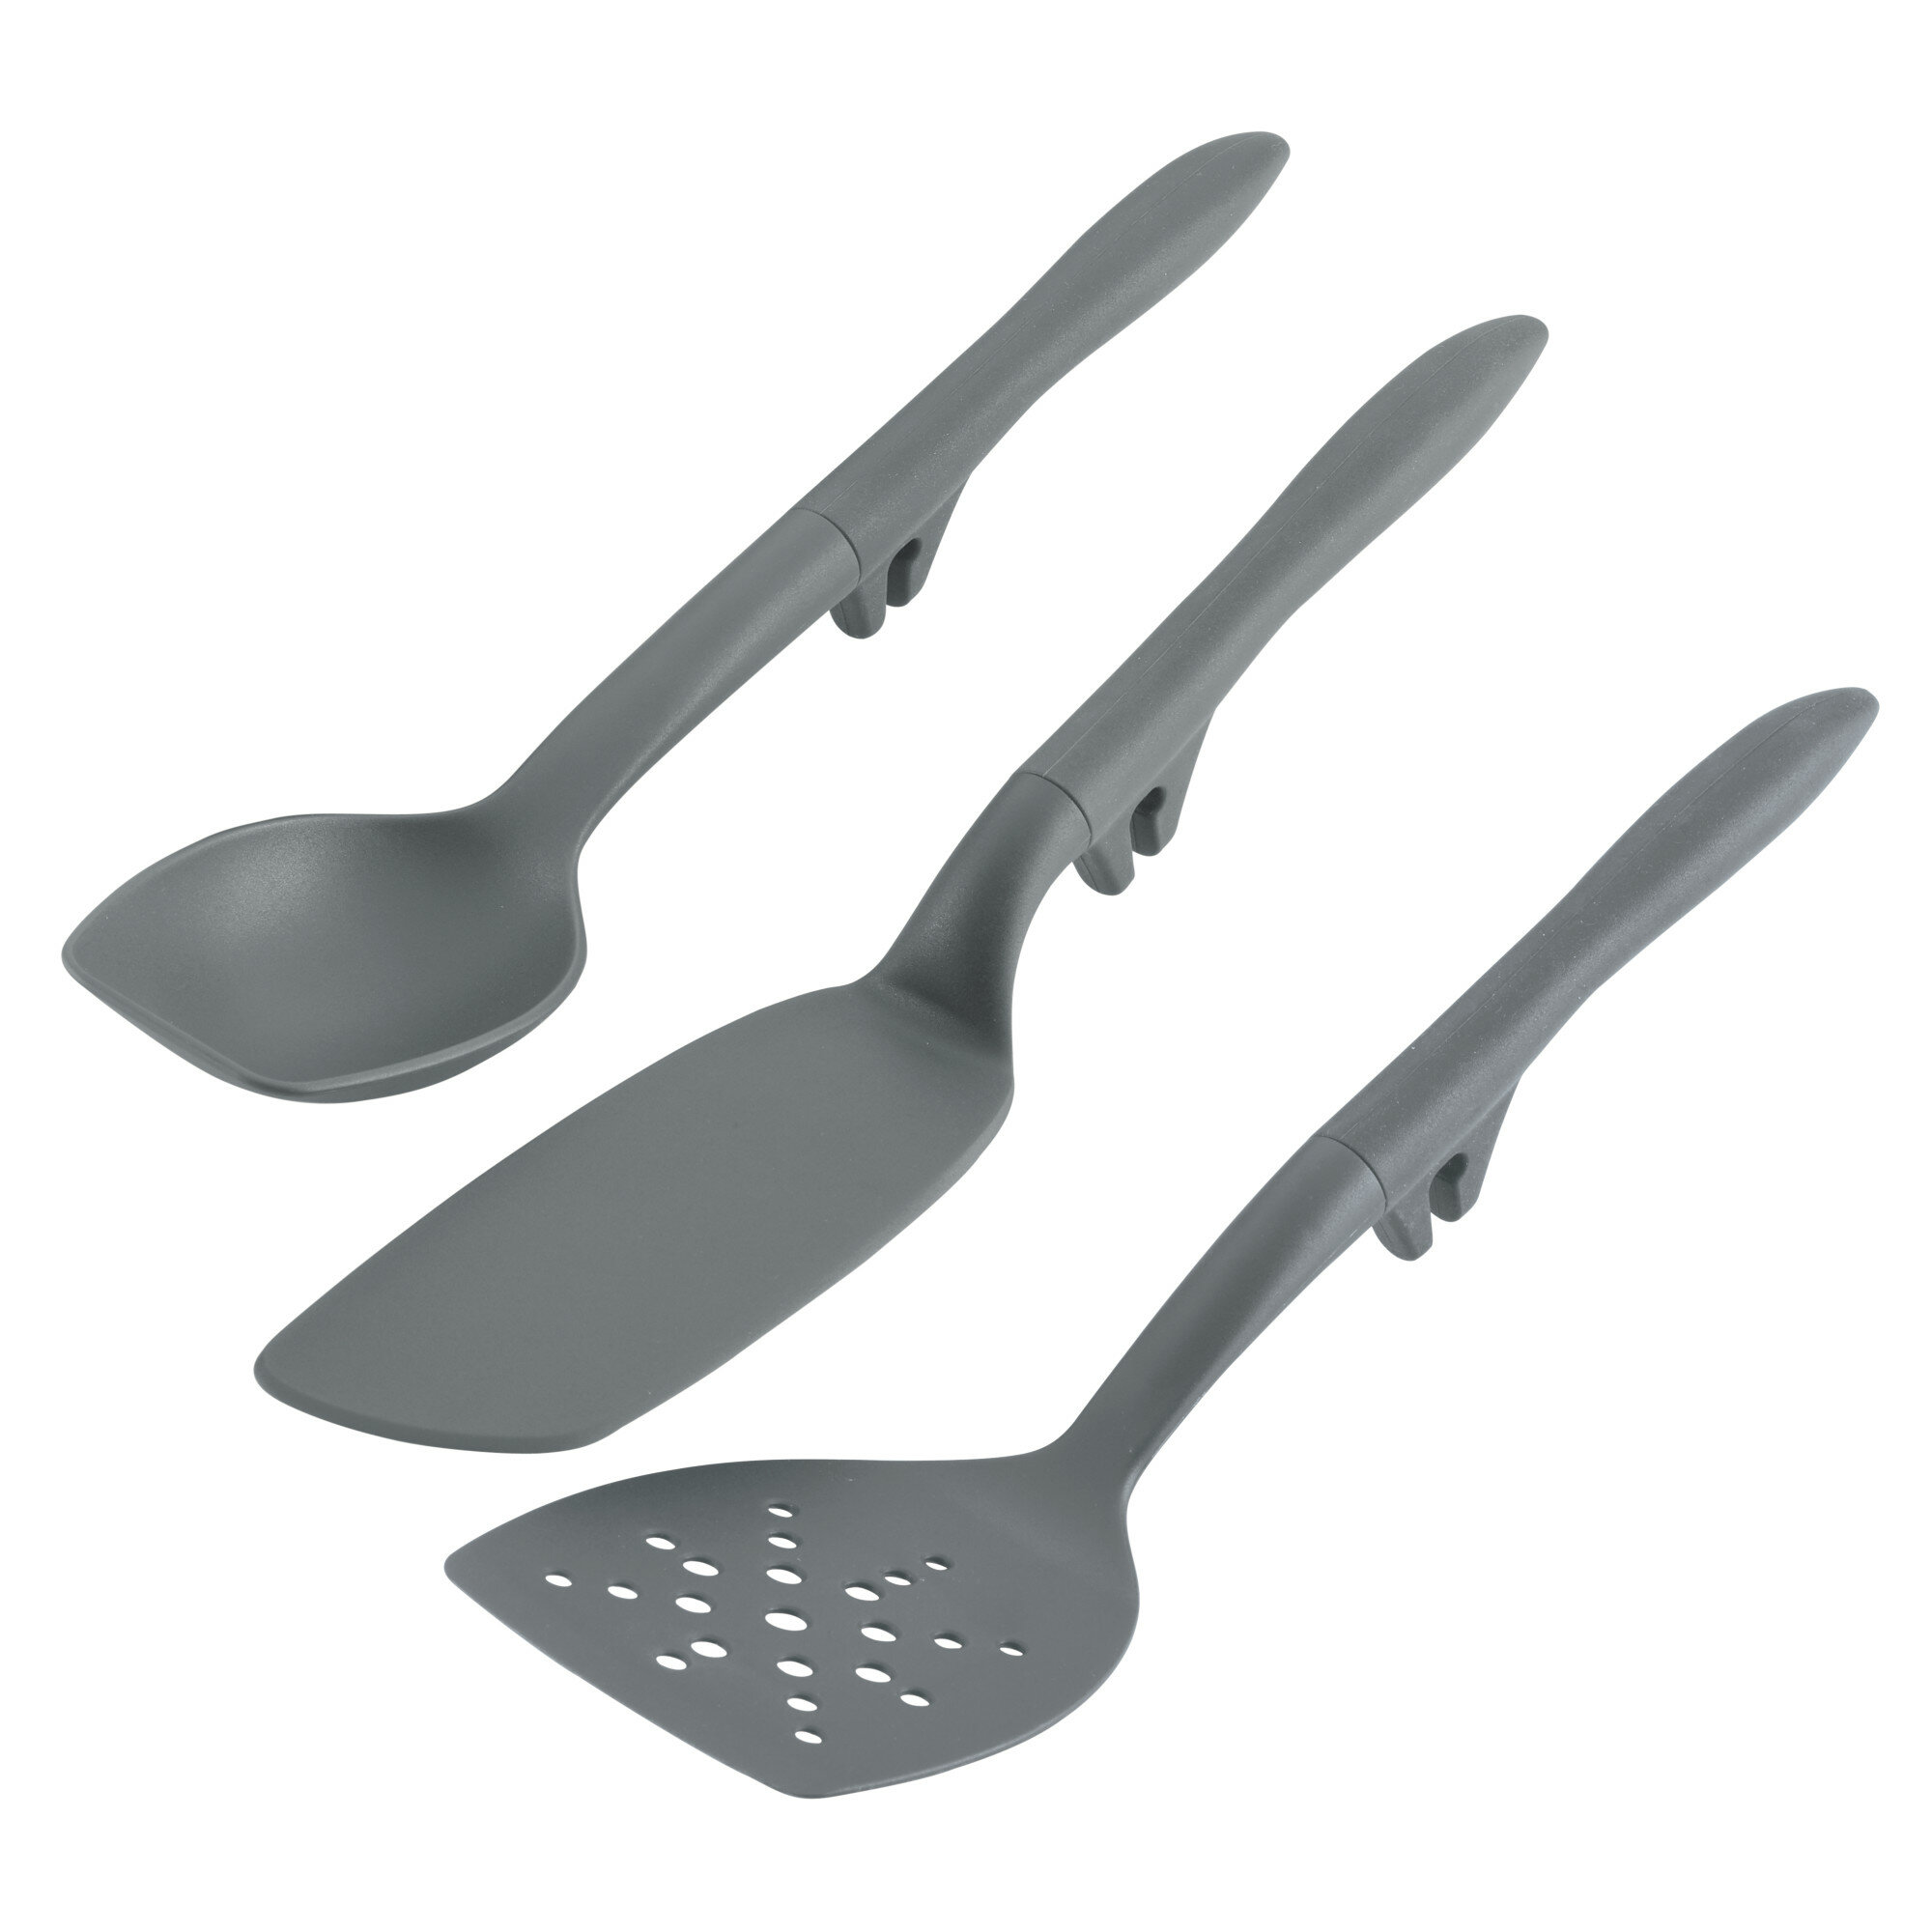 Rachael Ray Gray Tools and Gadgets Lazy Spoon and Flexi Turner 3 Piece Set